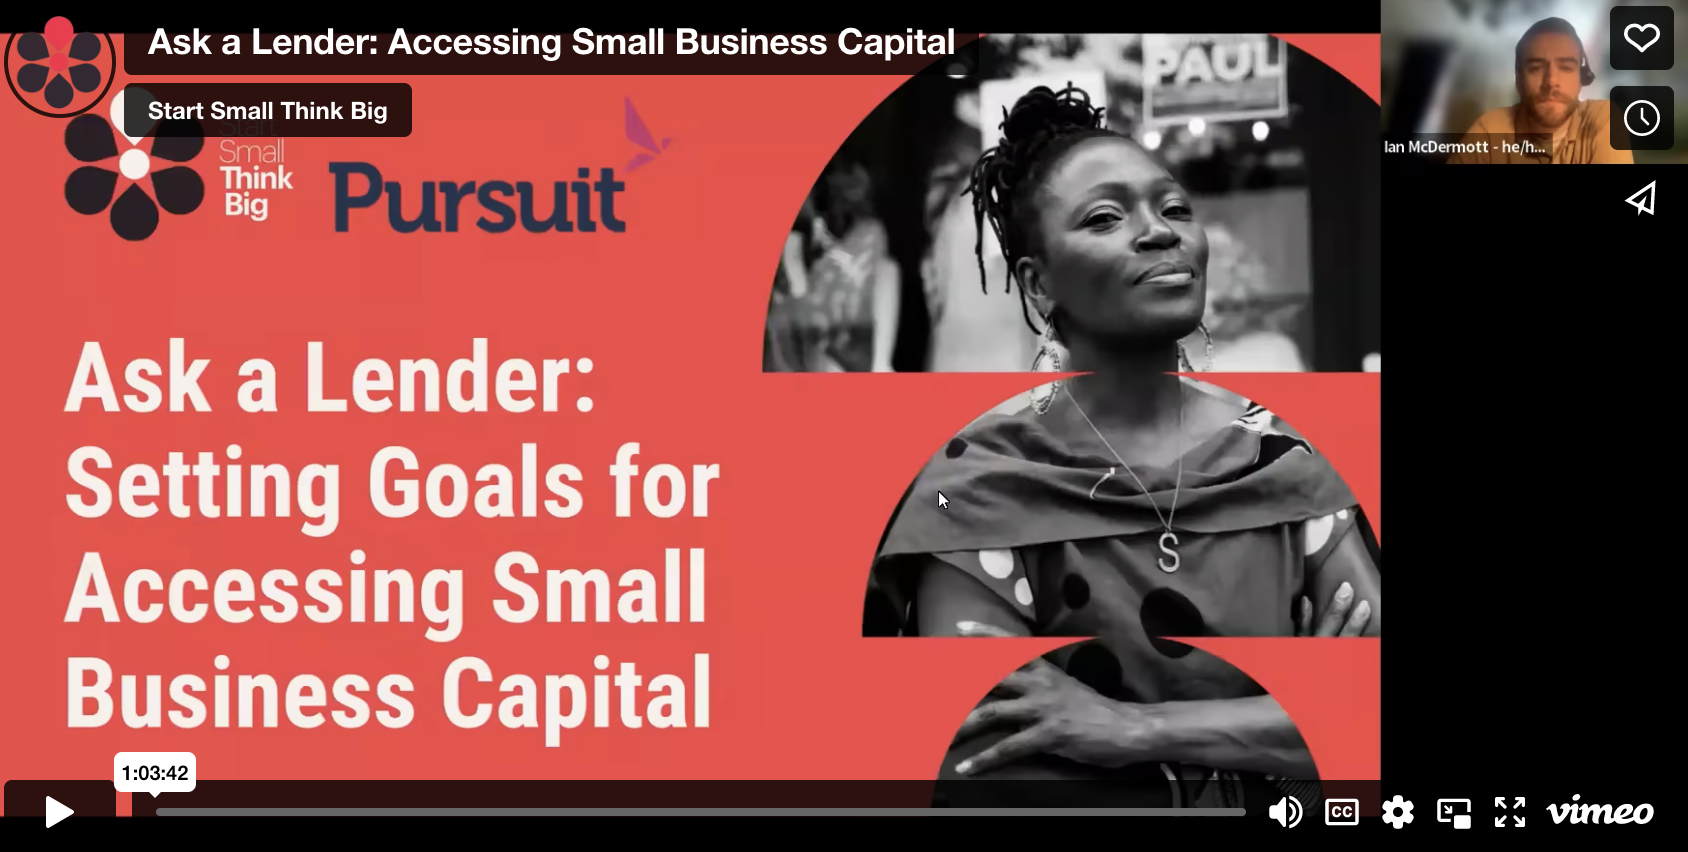 Ask a Lender: Accessing Small Business Capital